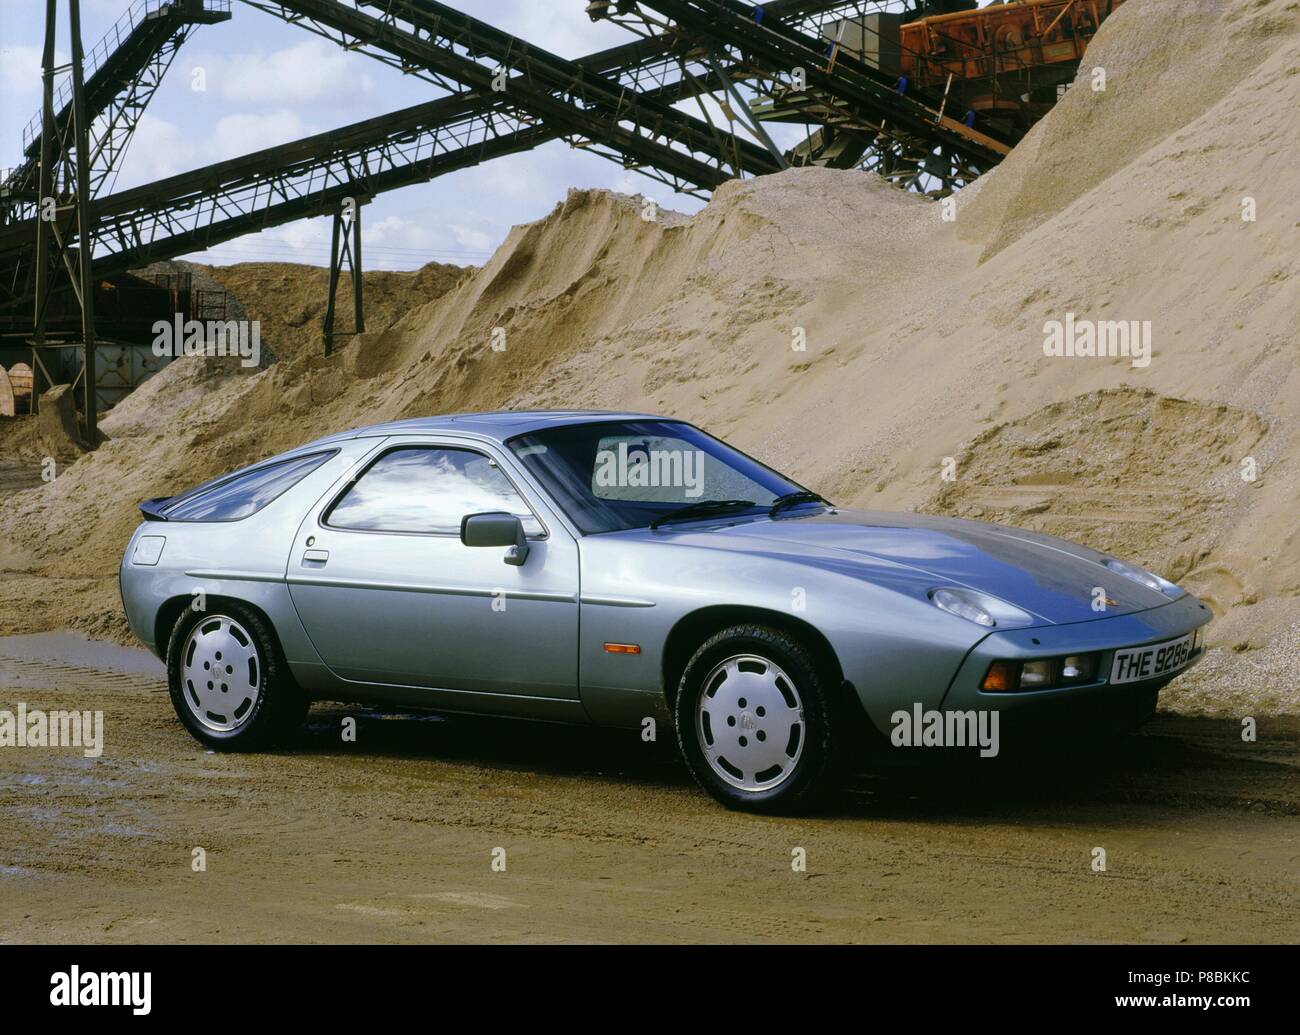 1984 Model High Resolution Stock Photography and Images - Alamy